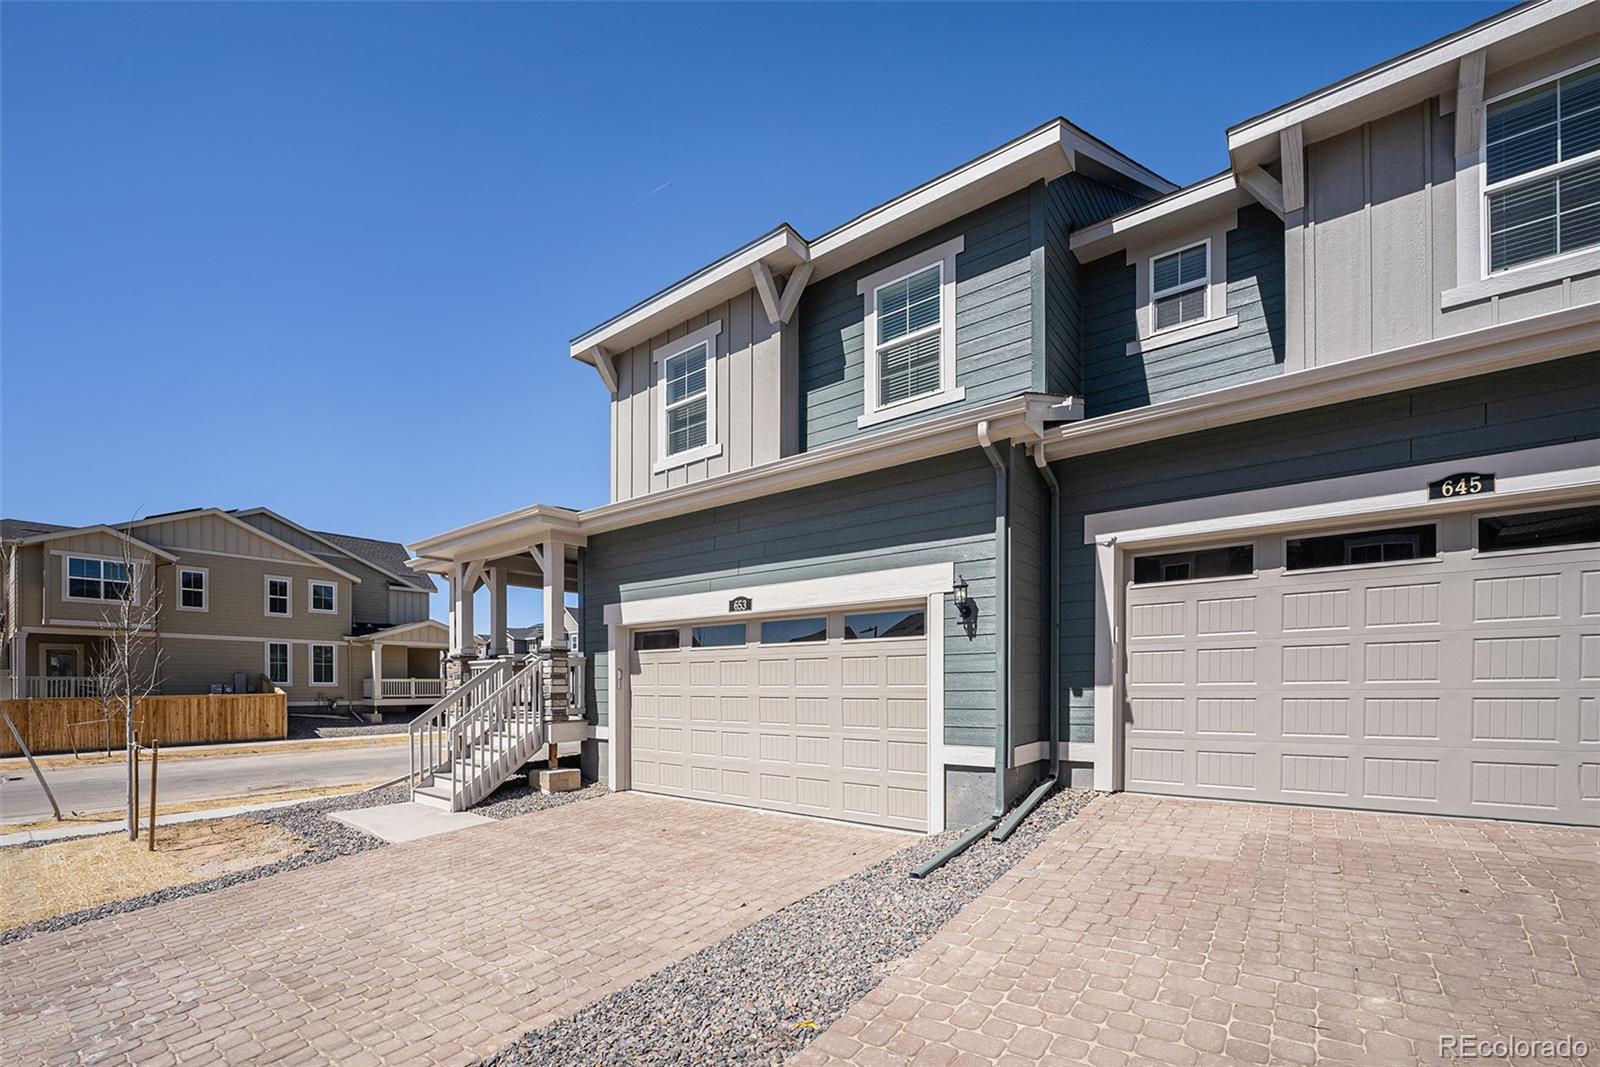 Report Image for 653  Flintwood Place,Erie, Colorado